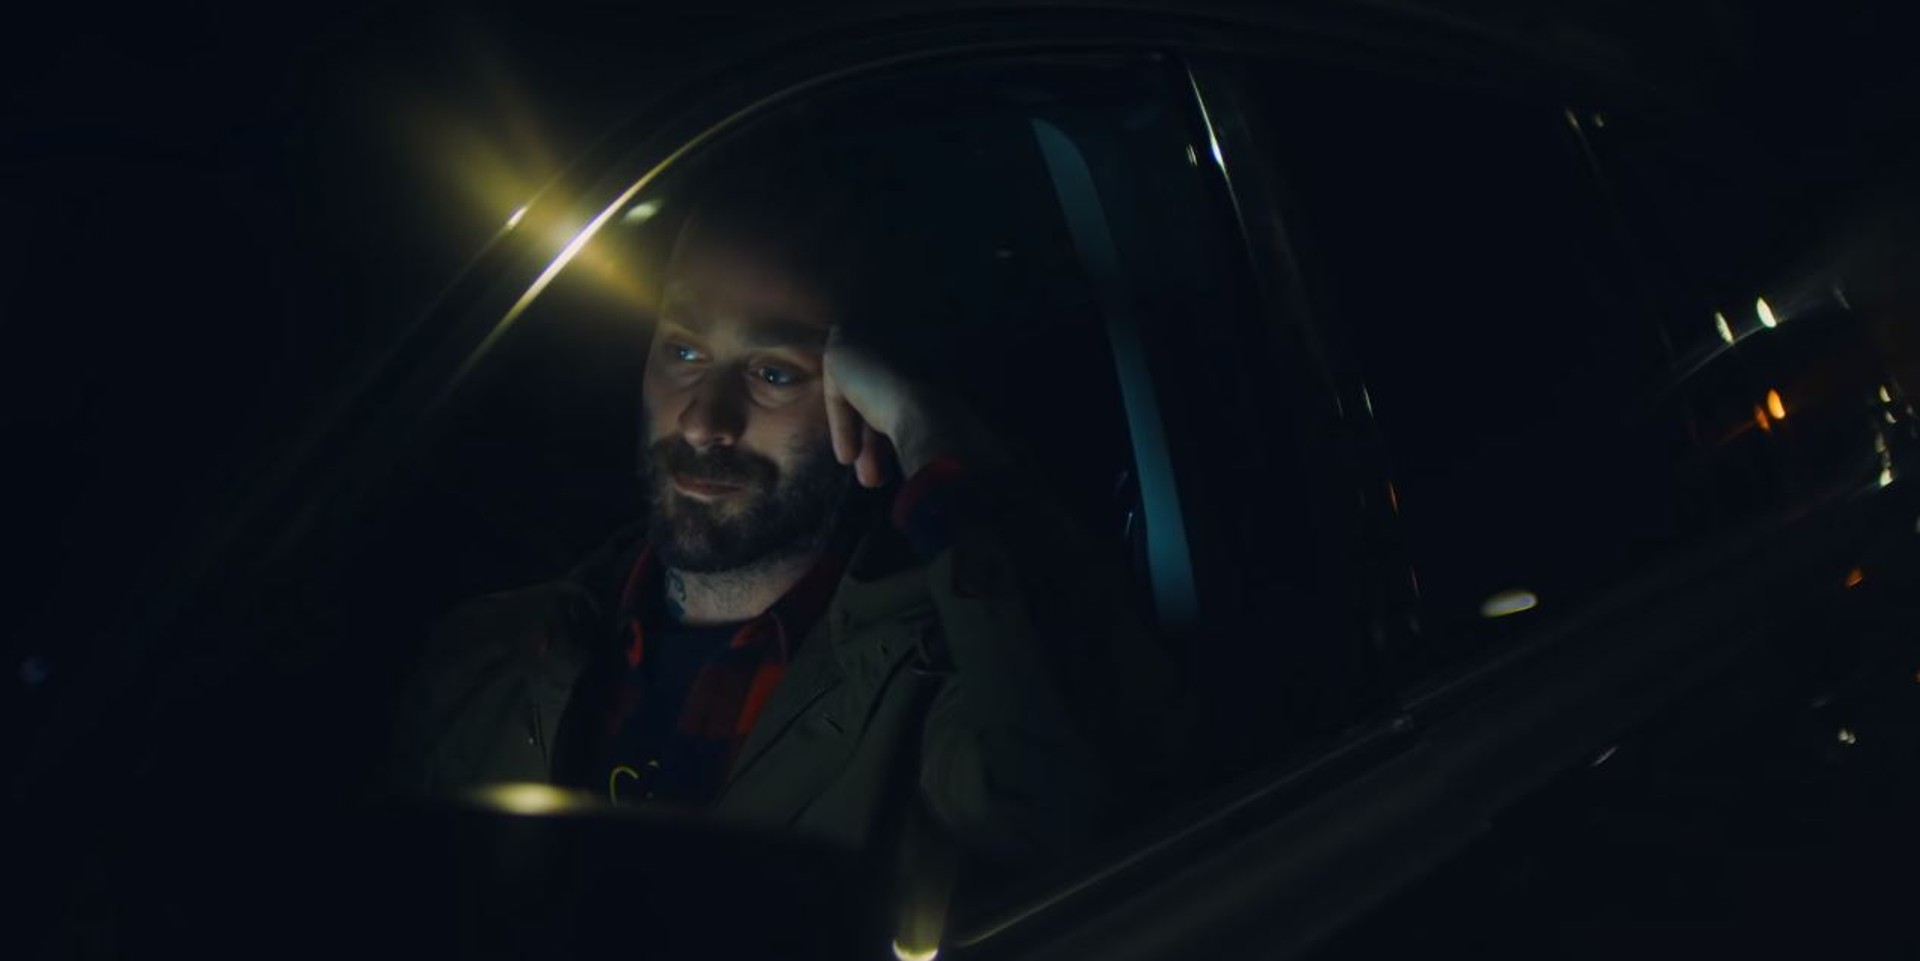 American Football unveil contemplative 'I Can't Feel You' music video – watch